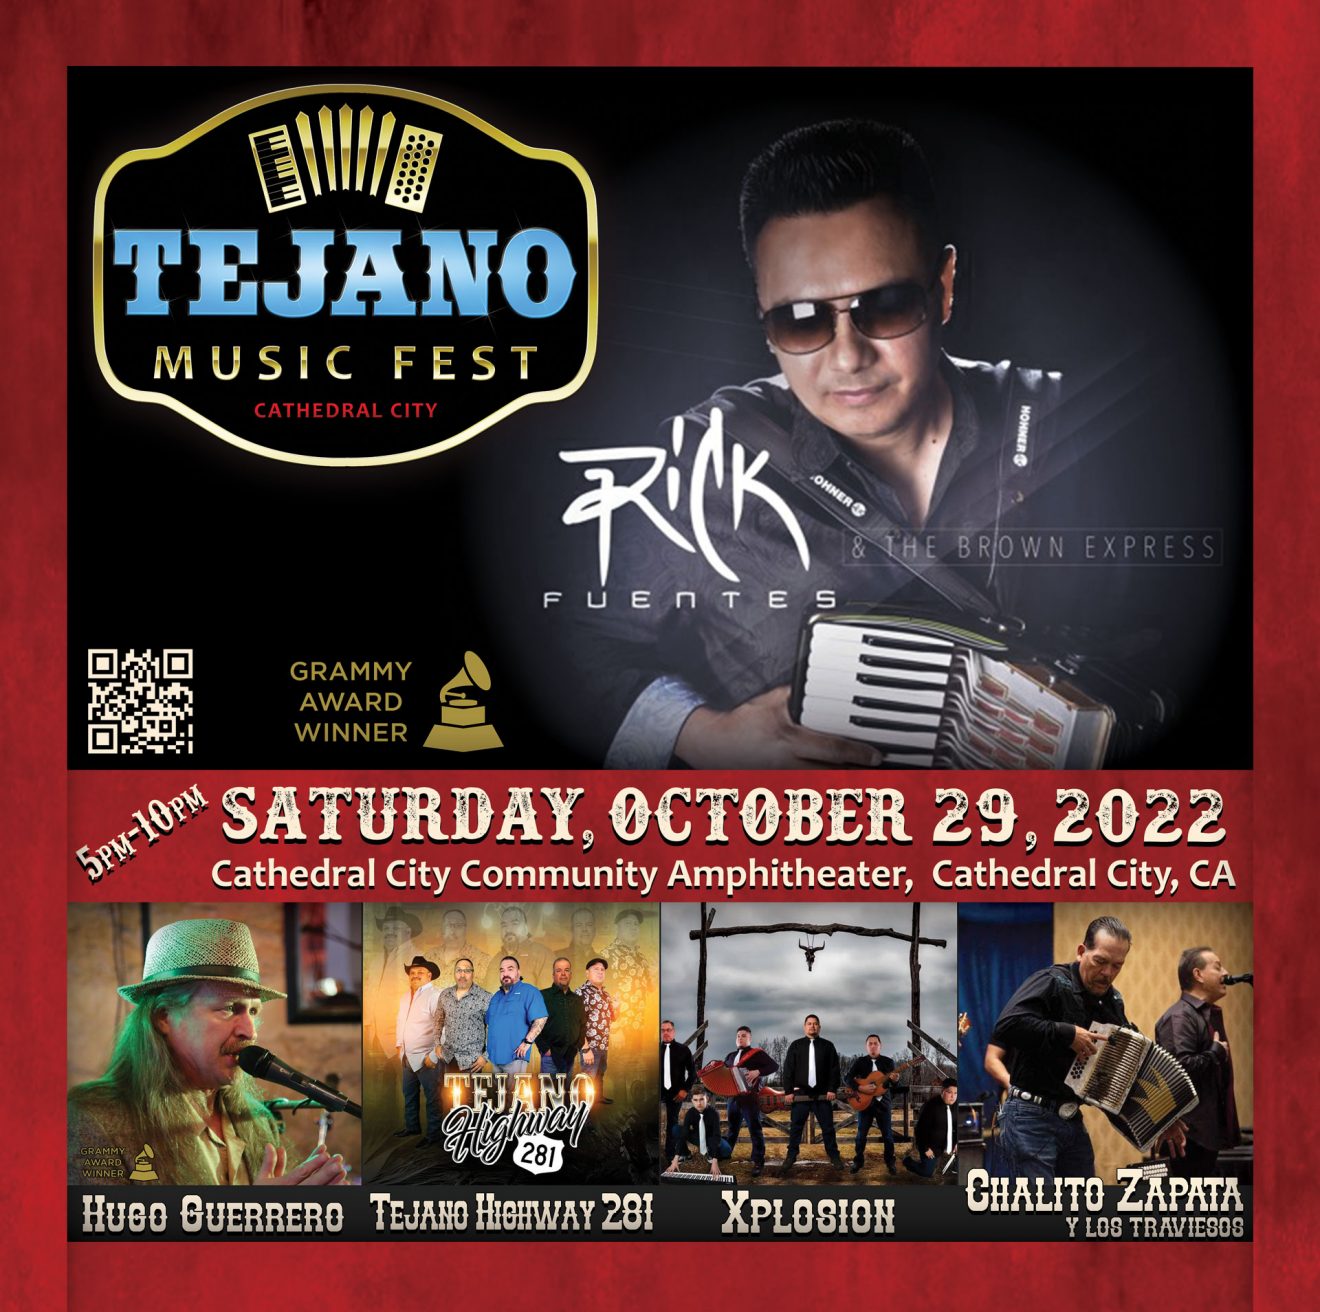 A Night of Grammy Award Winning Bands at the Tejano Music Festival on October 29th